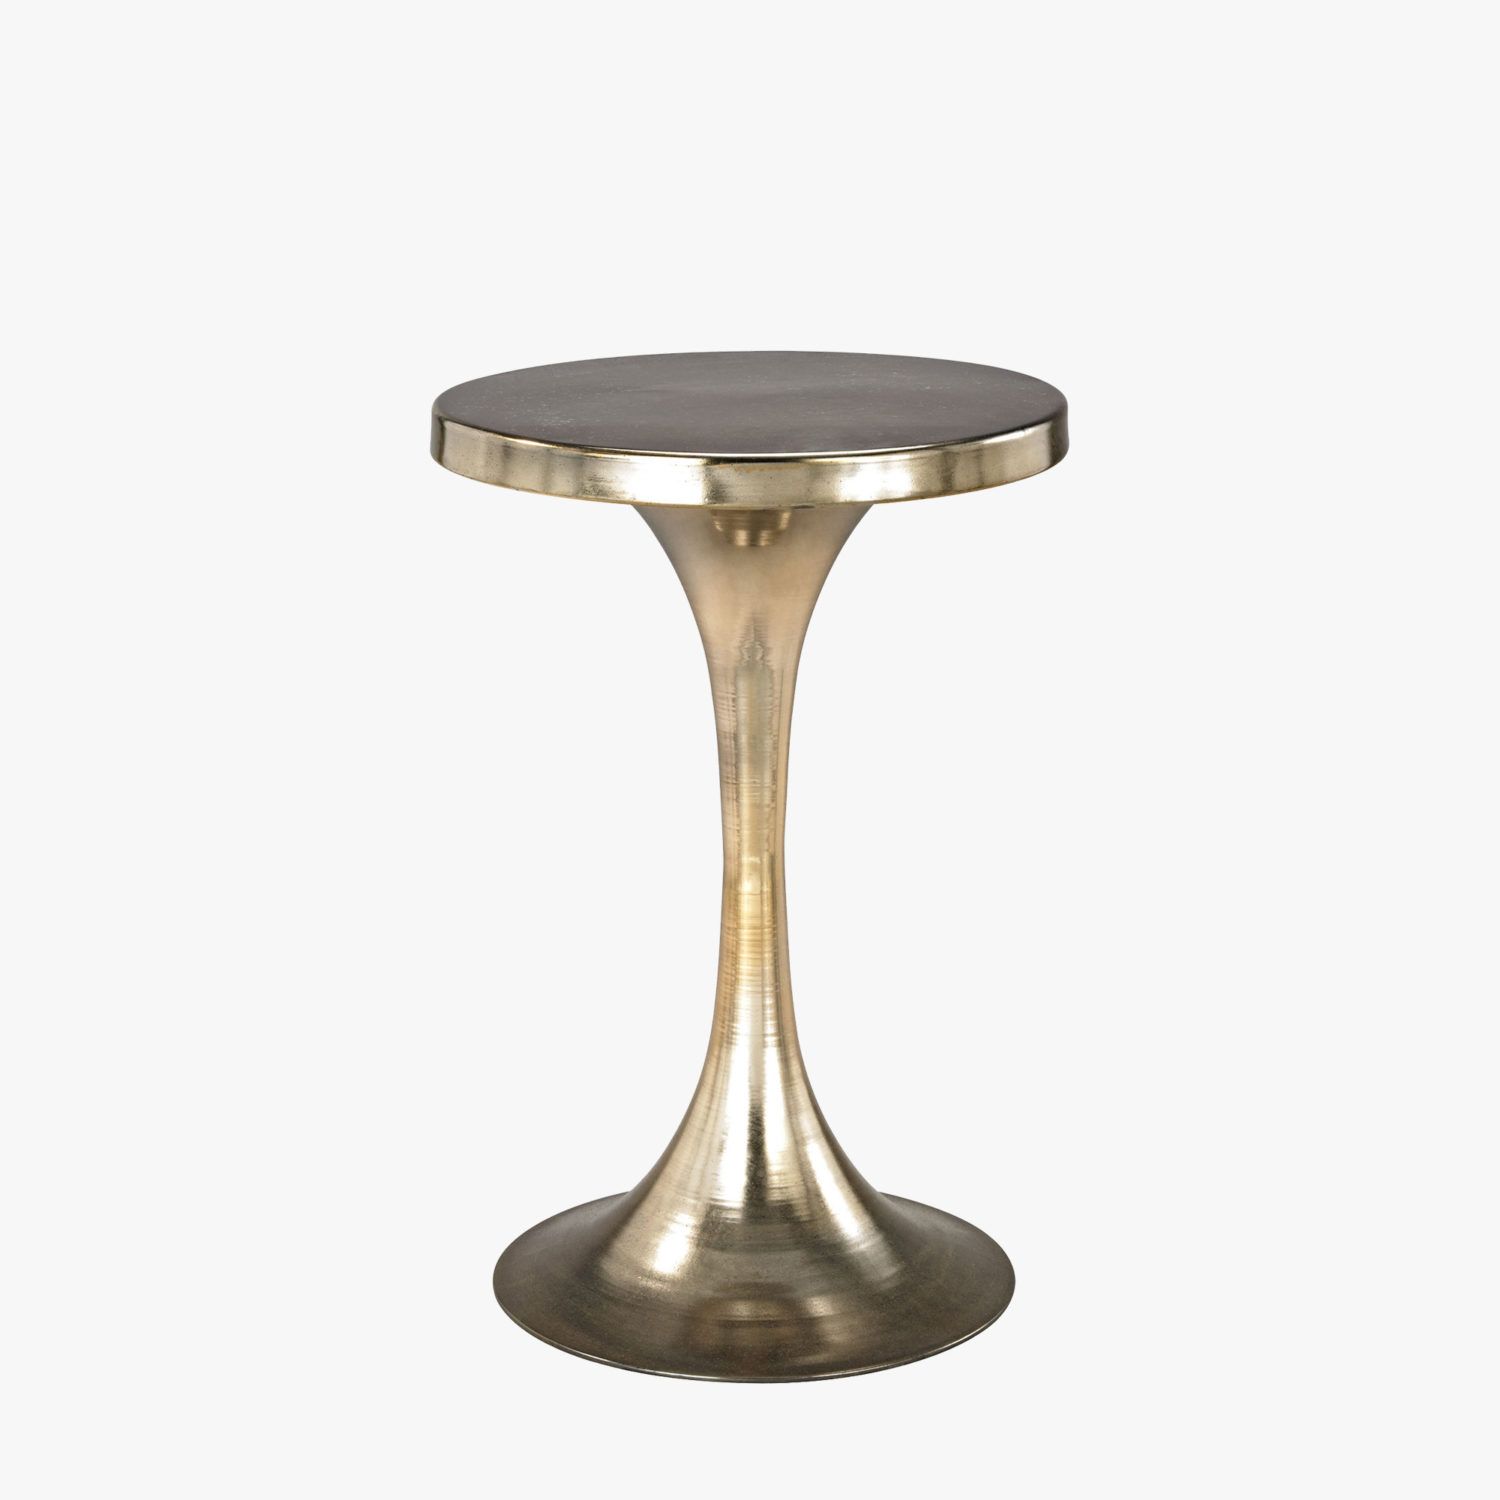 antique gold pedestal accent table tables coffee side small our the perfect perch for cocktail this makes quite statement ikea storage shelf unit outside containers red lamp wine